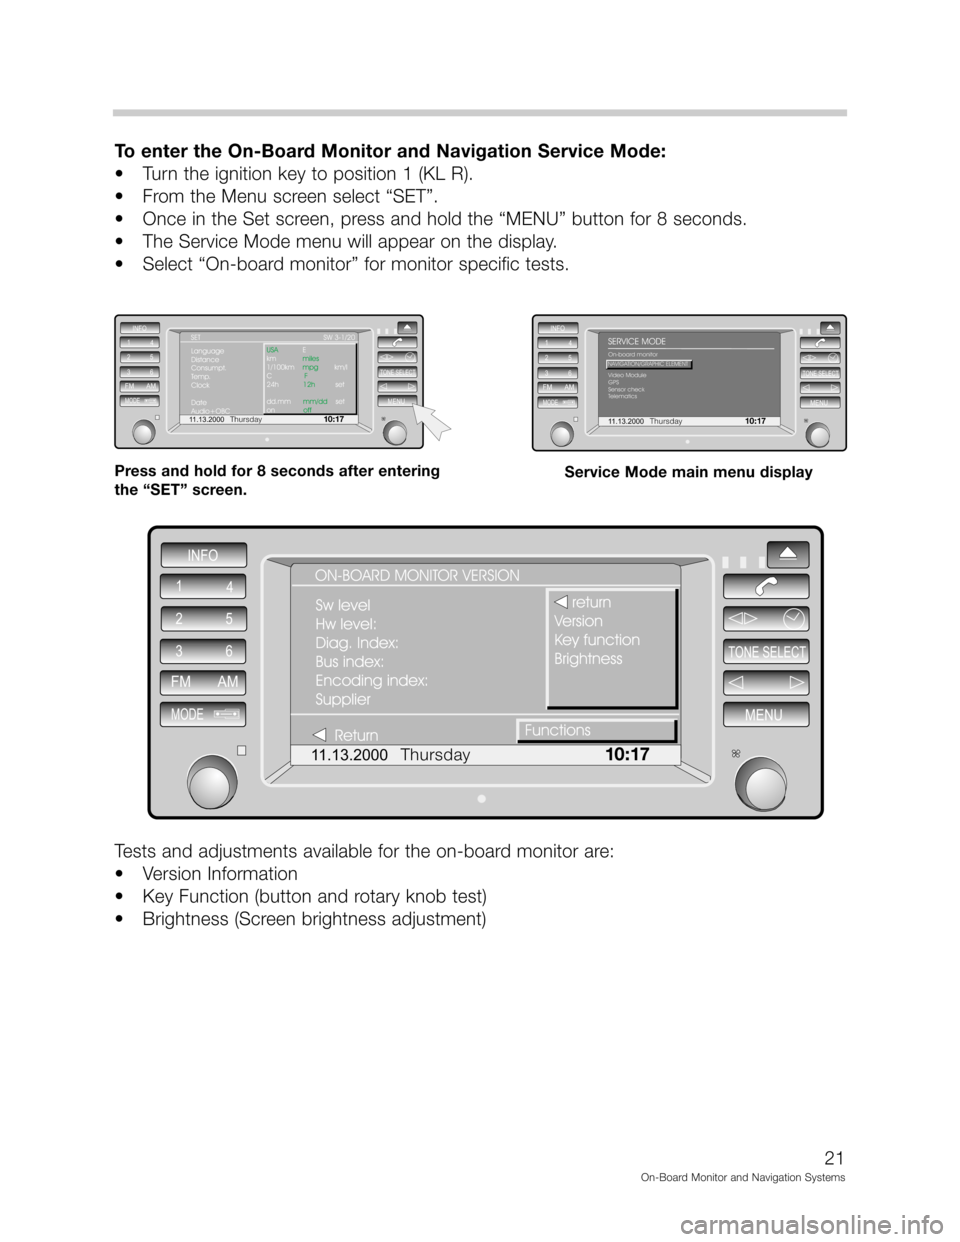 BMW 3 SERIES 2002 E46 On Board Monitor System Owners Manual *



"&
(	
!&!"	! "!", 1" !, 	
 #


9

*7$3 8
 <	

?(#@
 

(